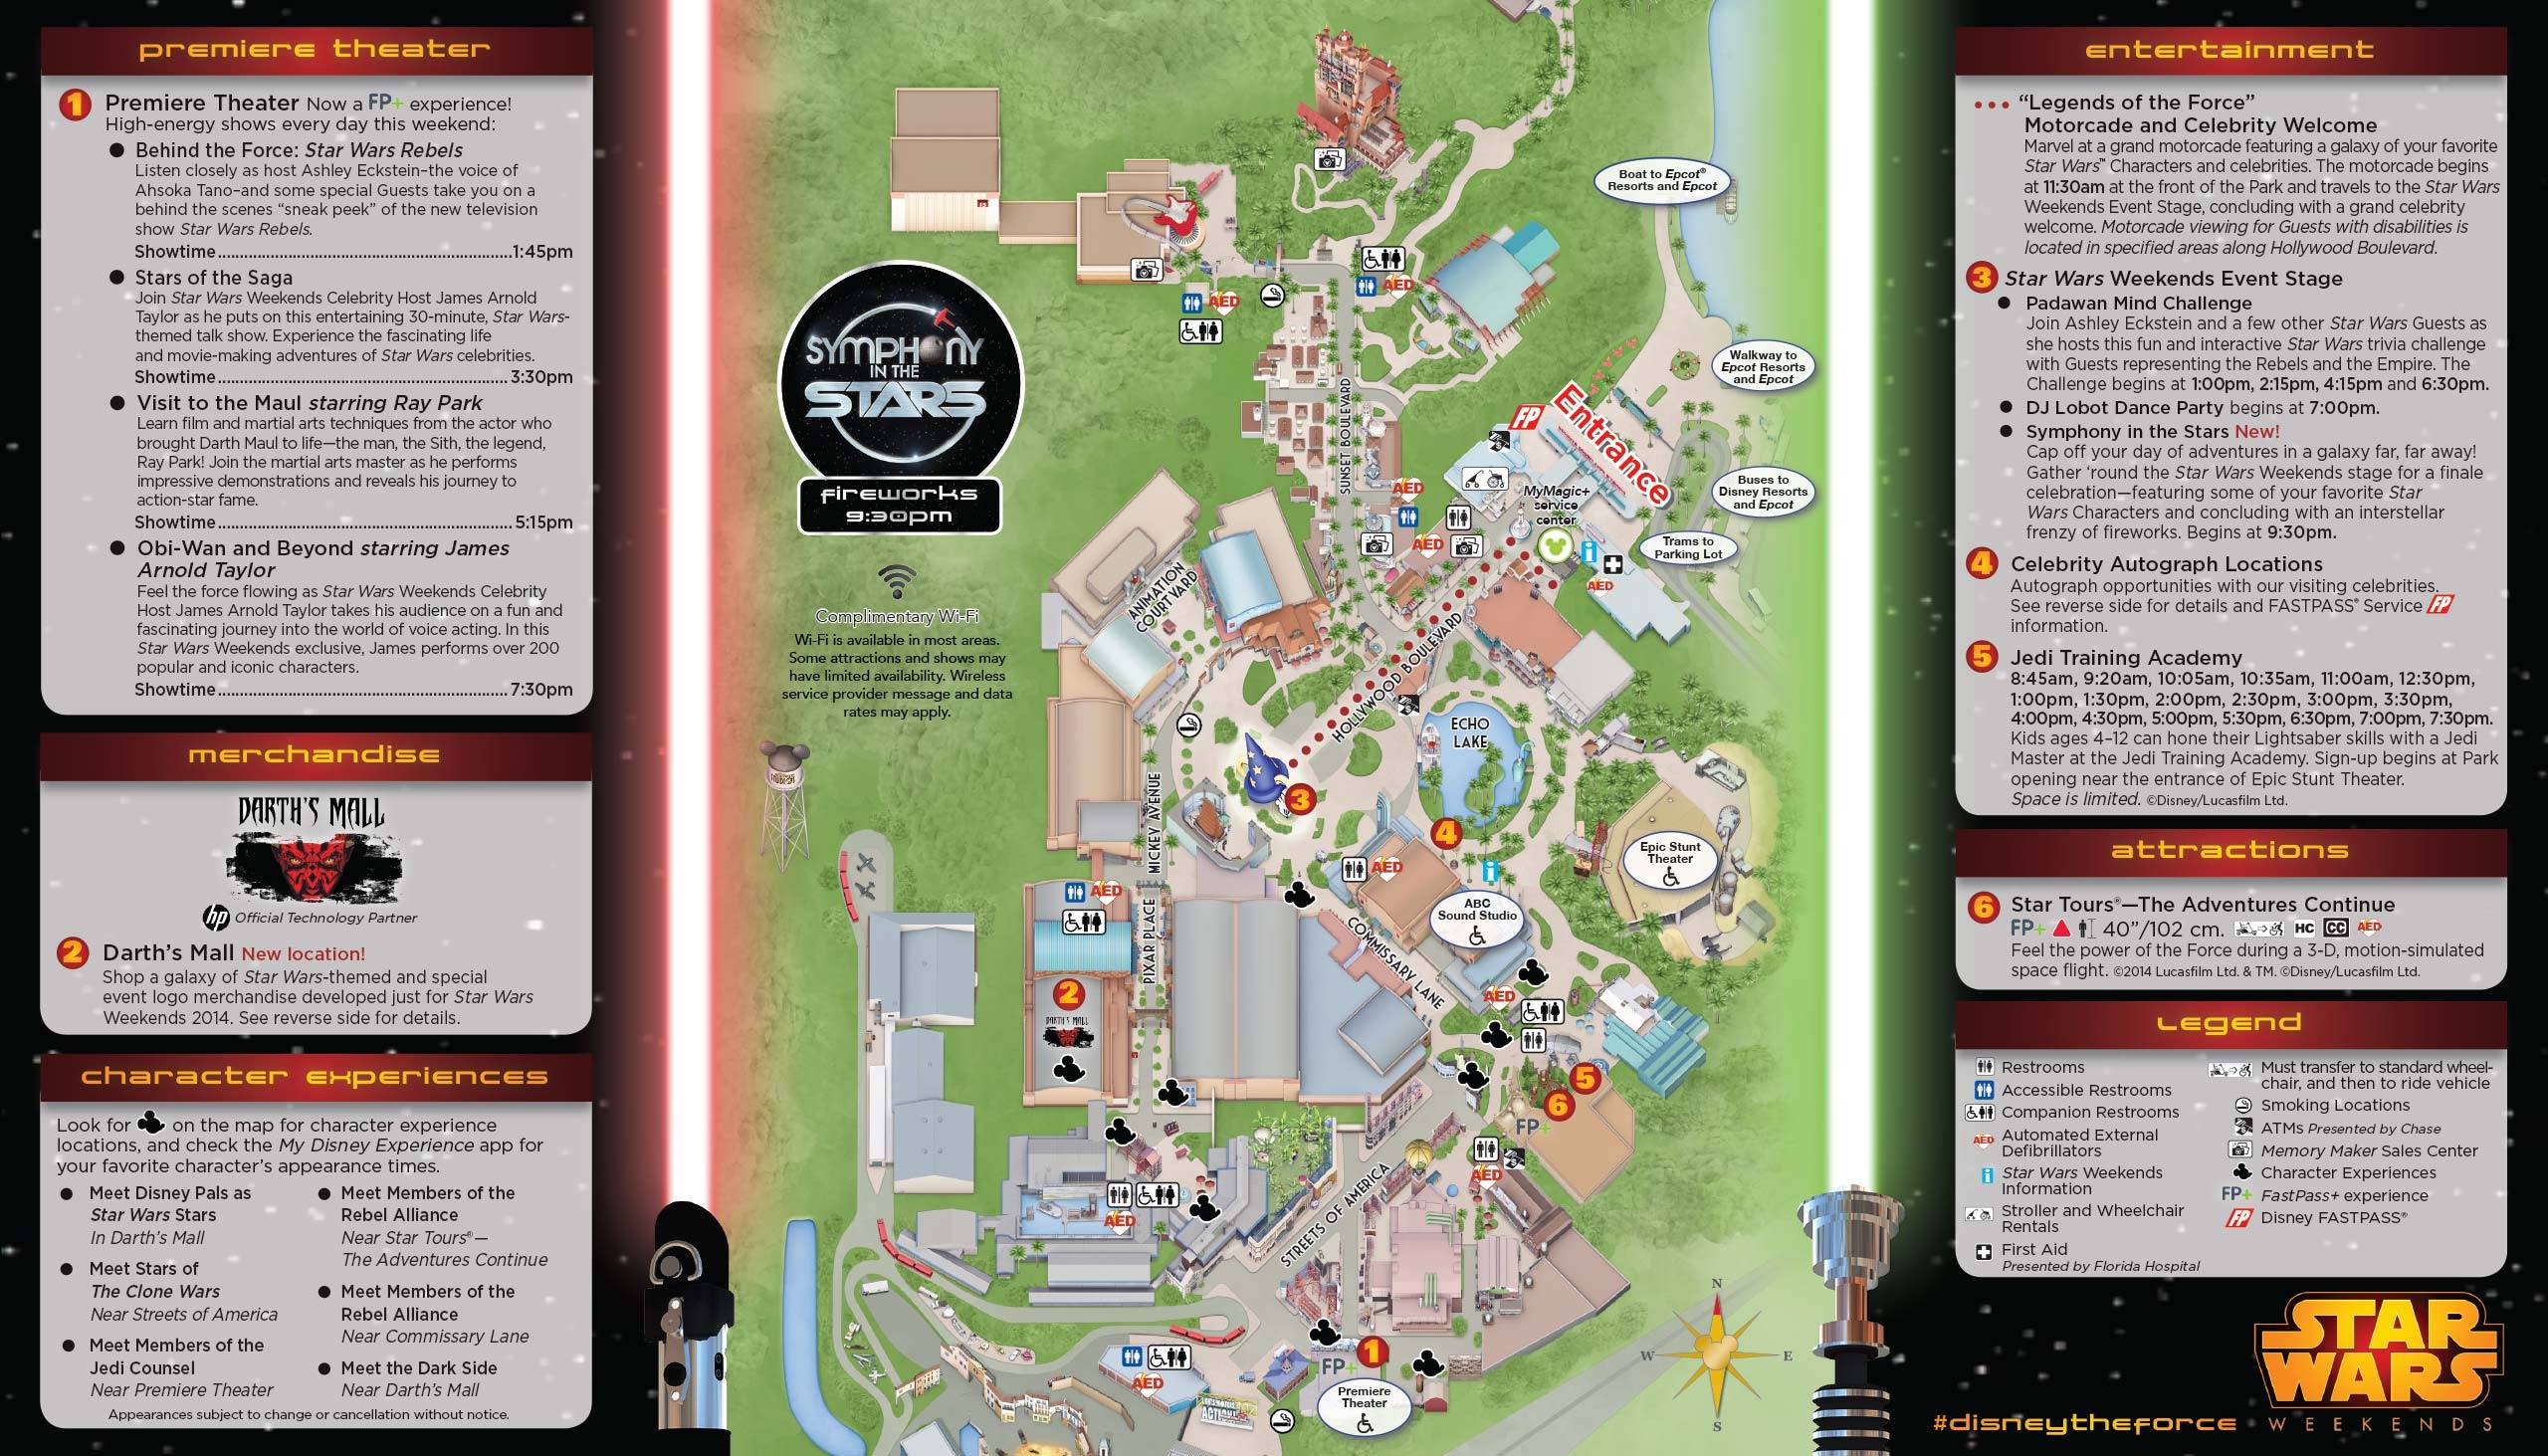 PHOTOS - Star Wars Weekends guide map for Weekend 3